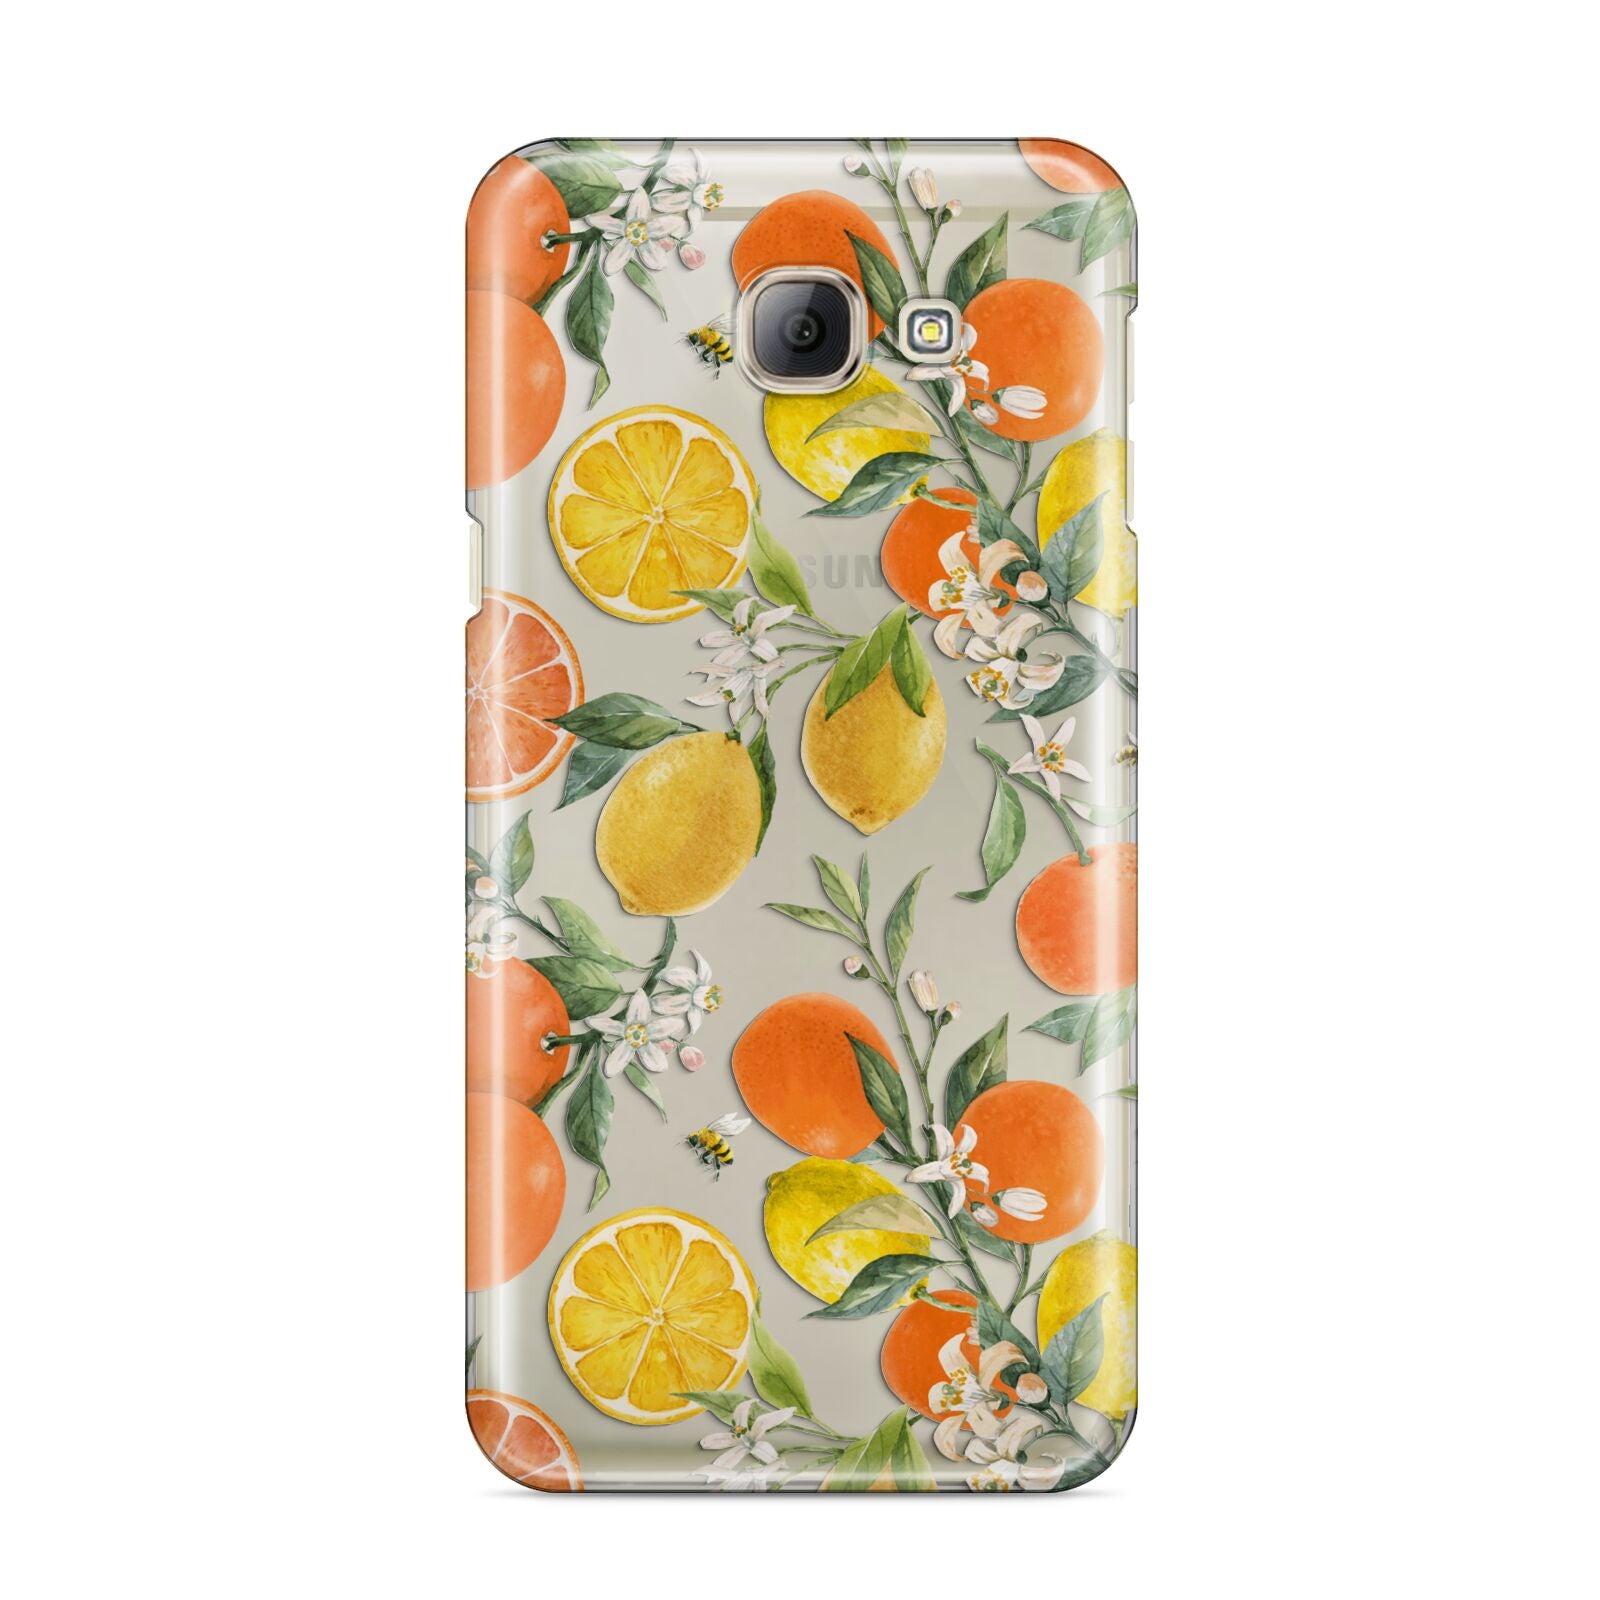 Lemons and Oranges Samsung Galaxy A8 2016 Case